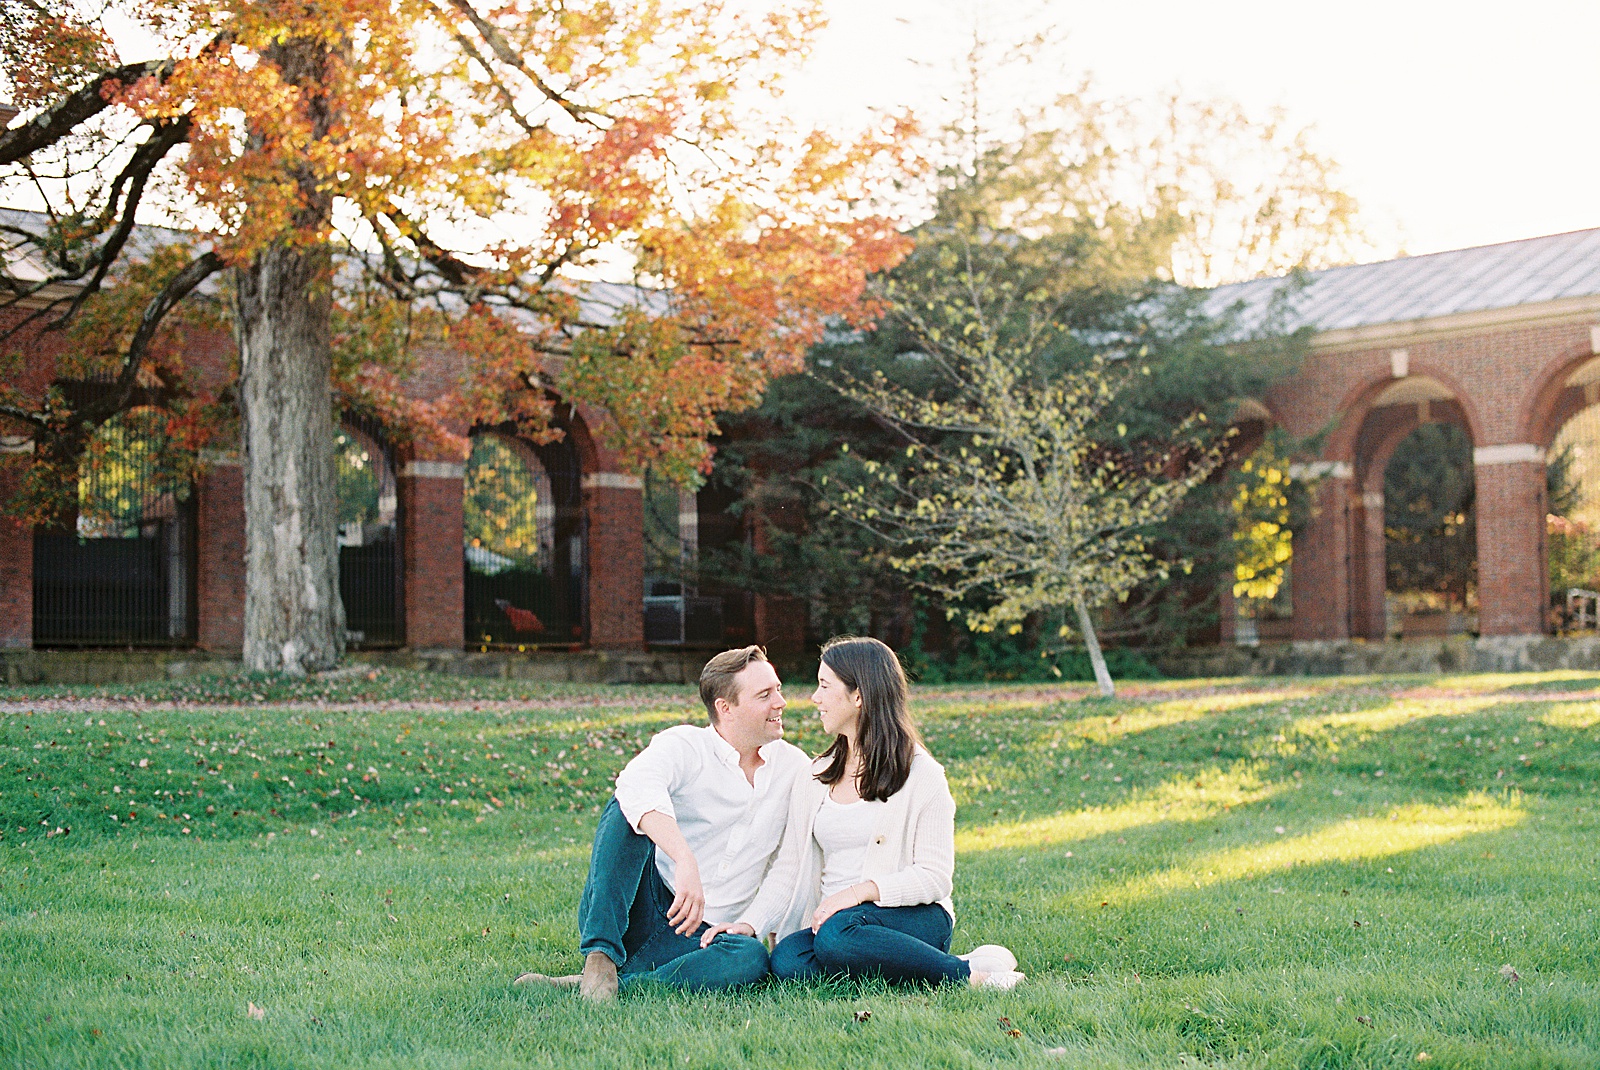 Couple wearing white and denim sitting on a lawn together for engagement photo shoot 